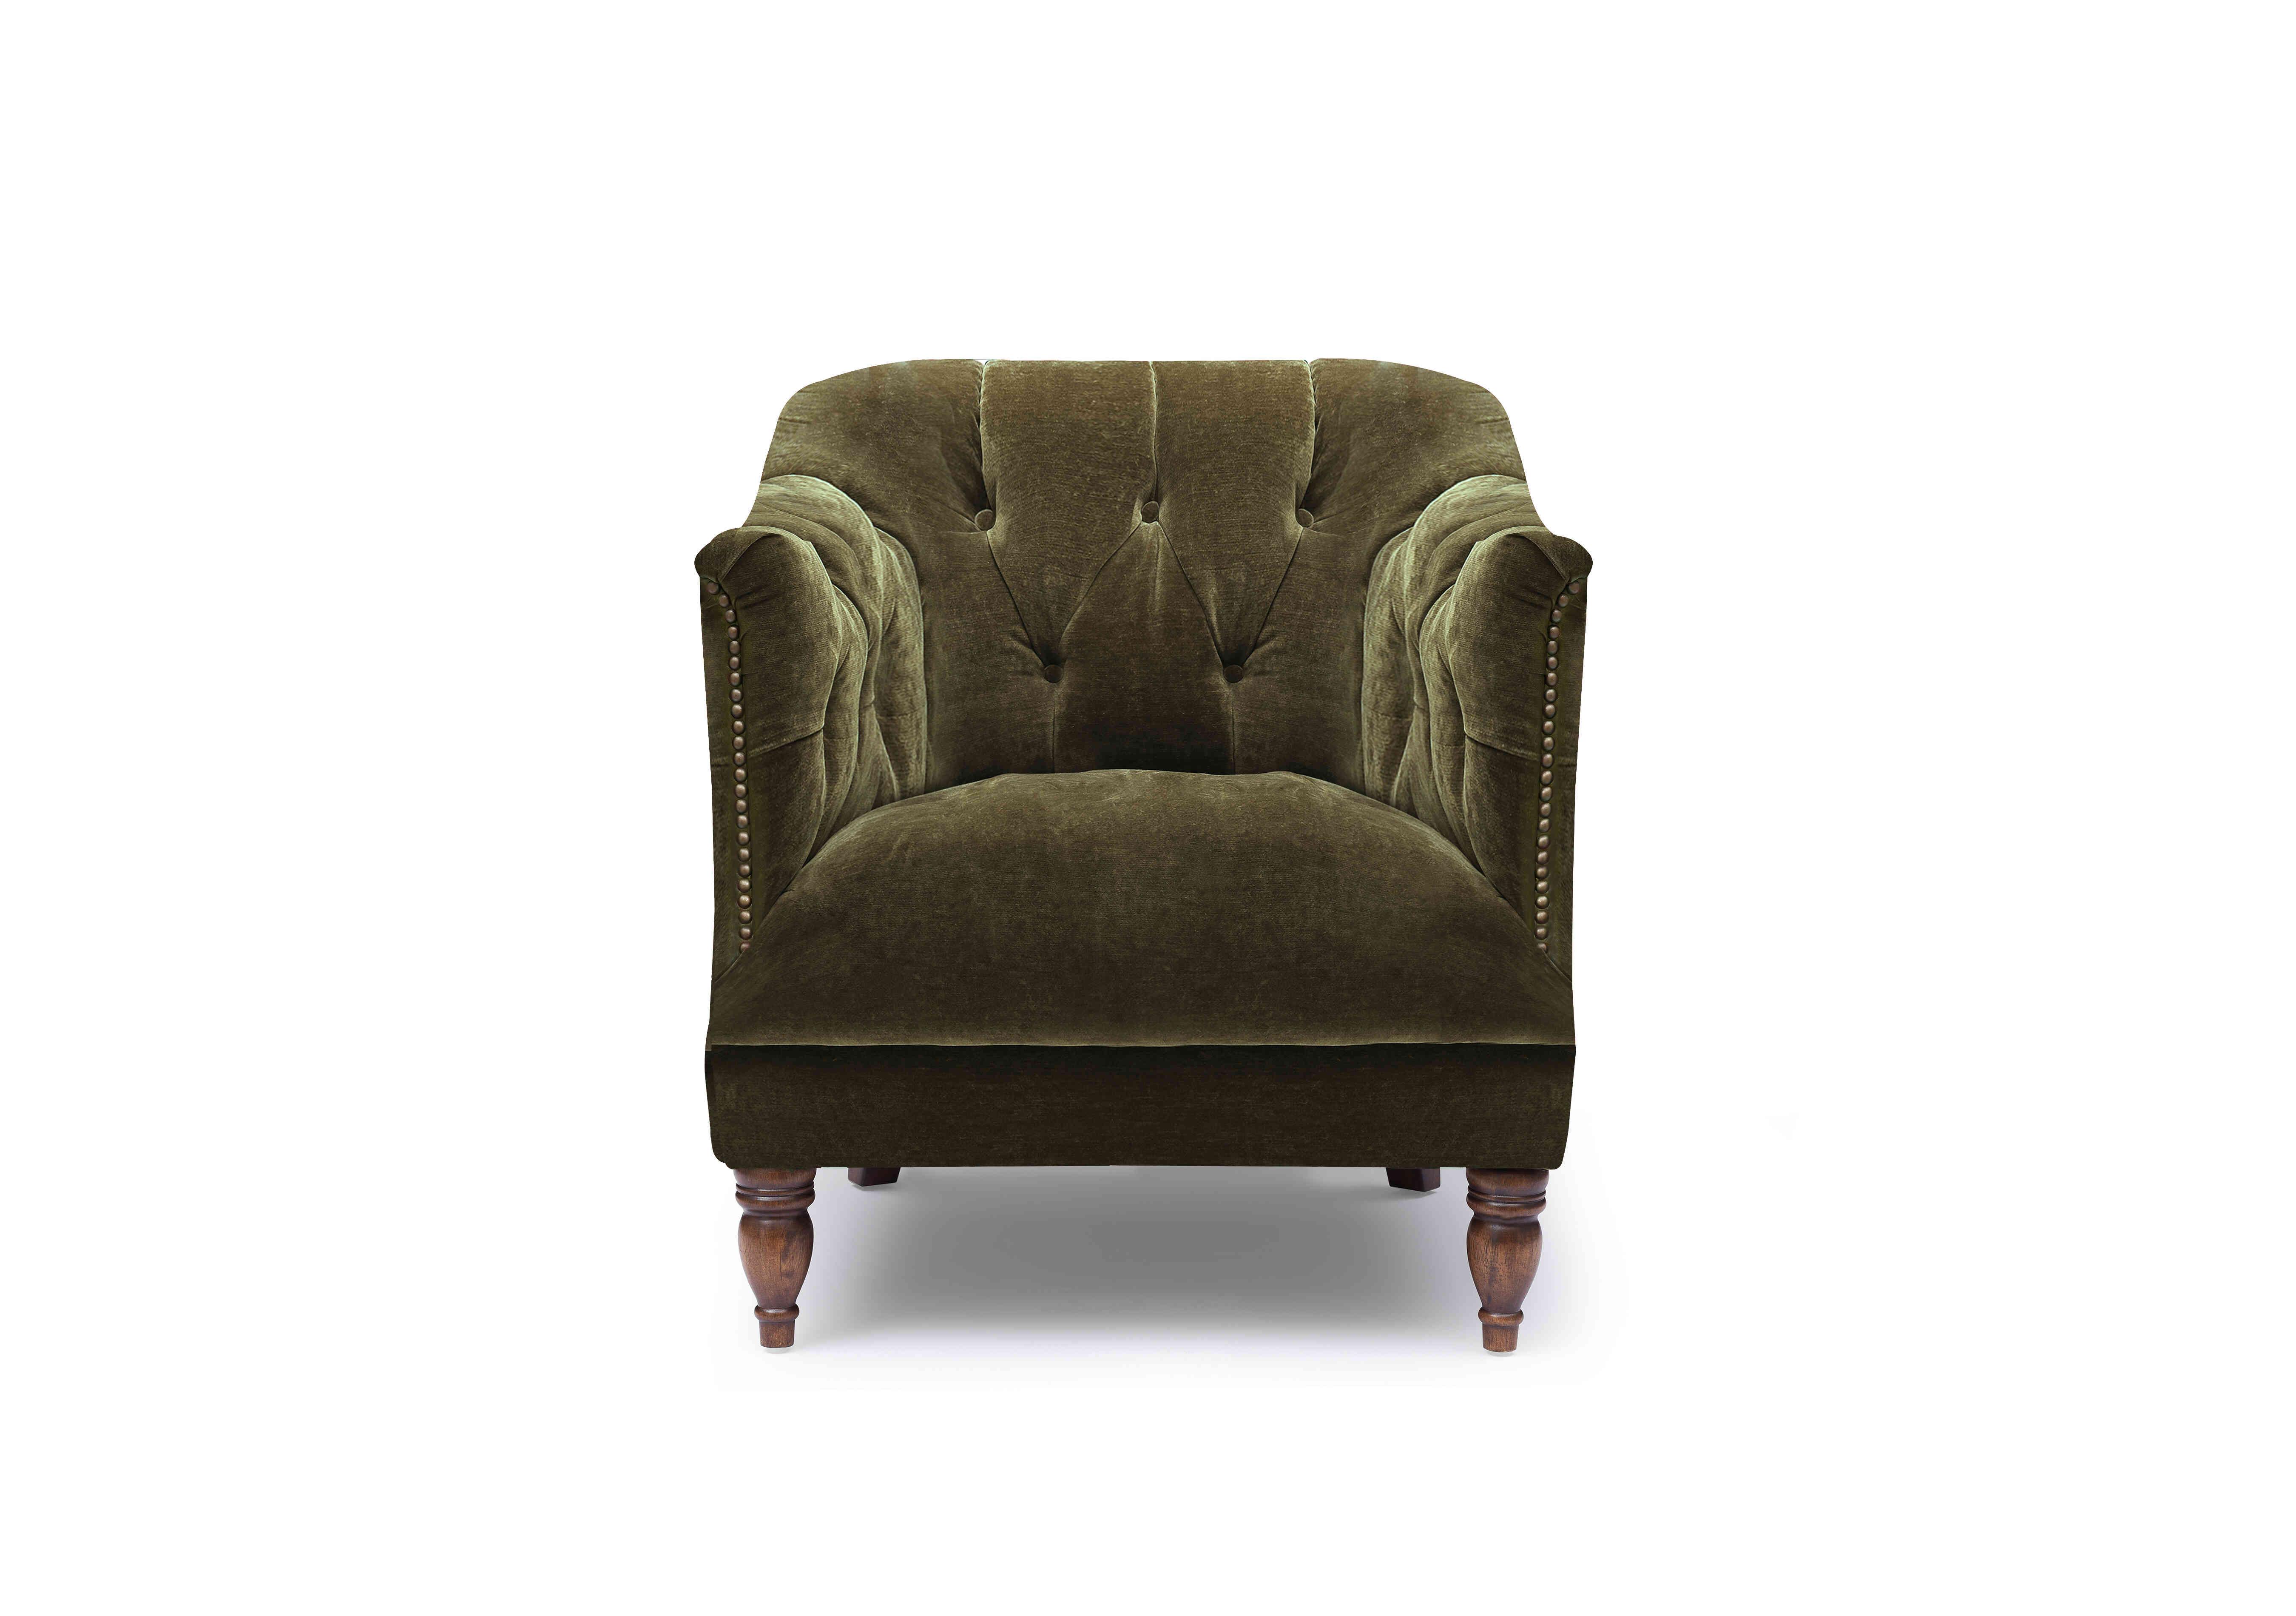 Henson Fabric Accent Tub Chair in X3y1-W018 Pine on Furniture Village